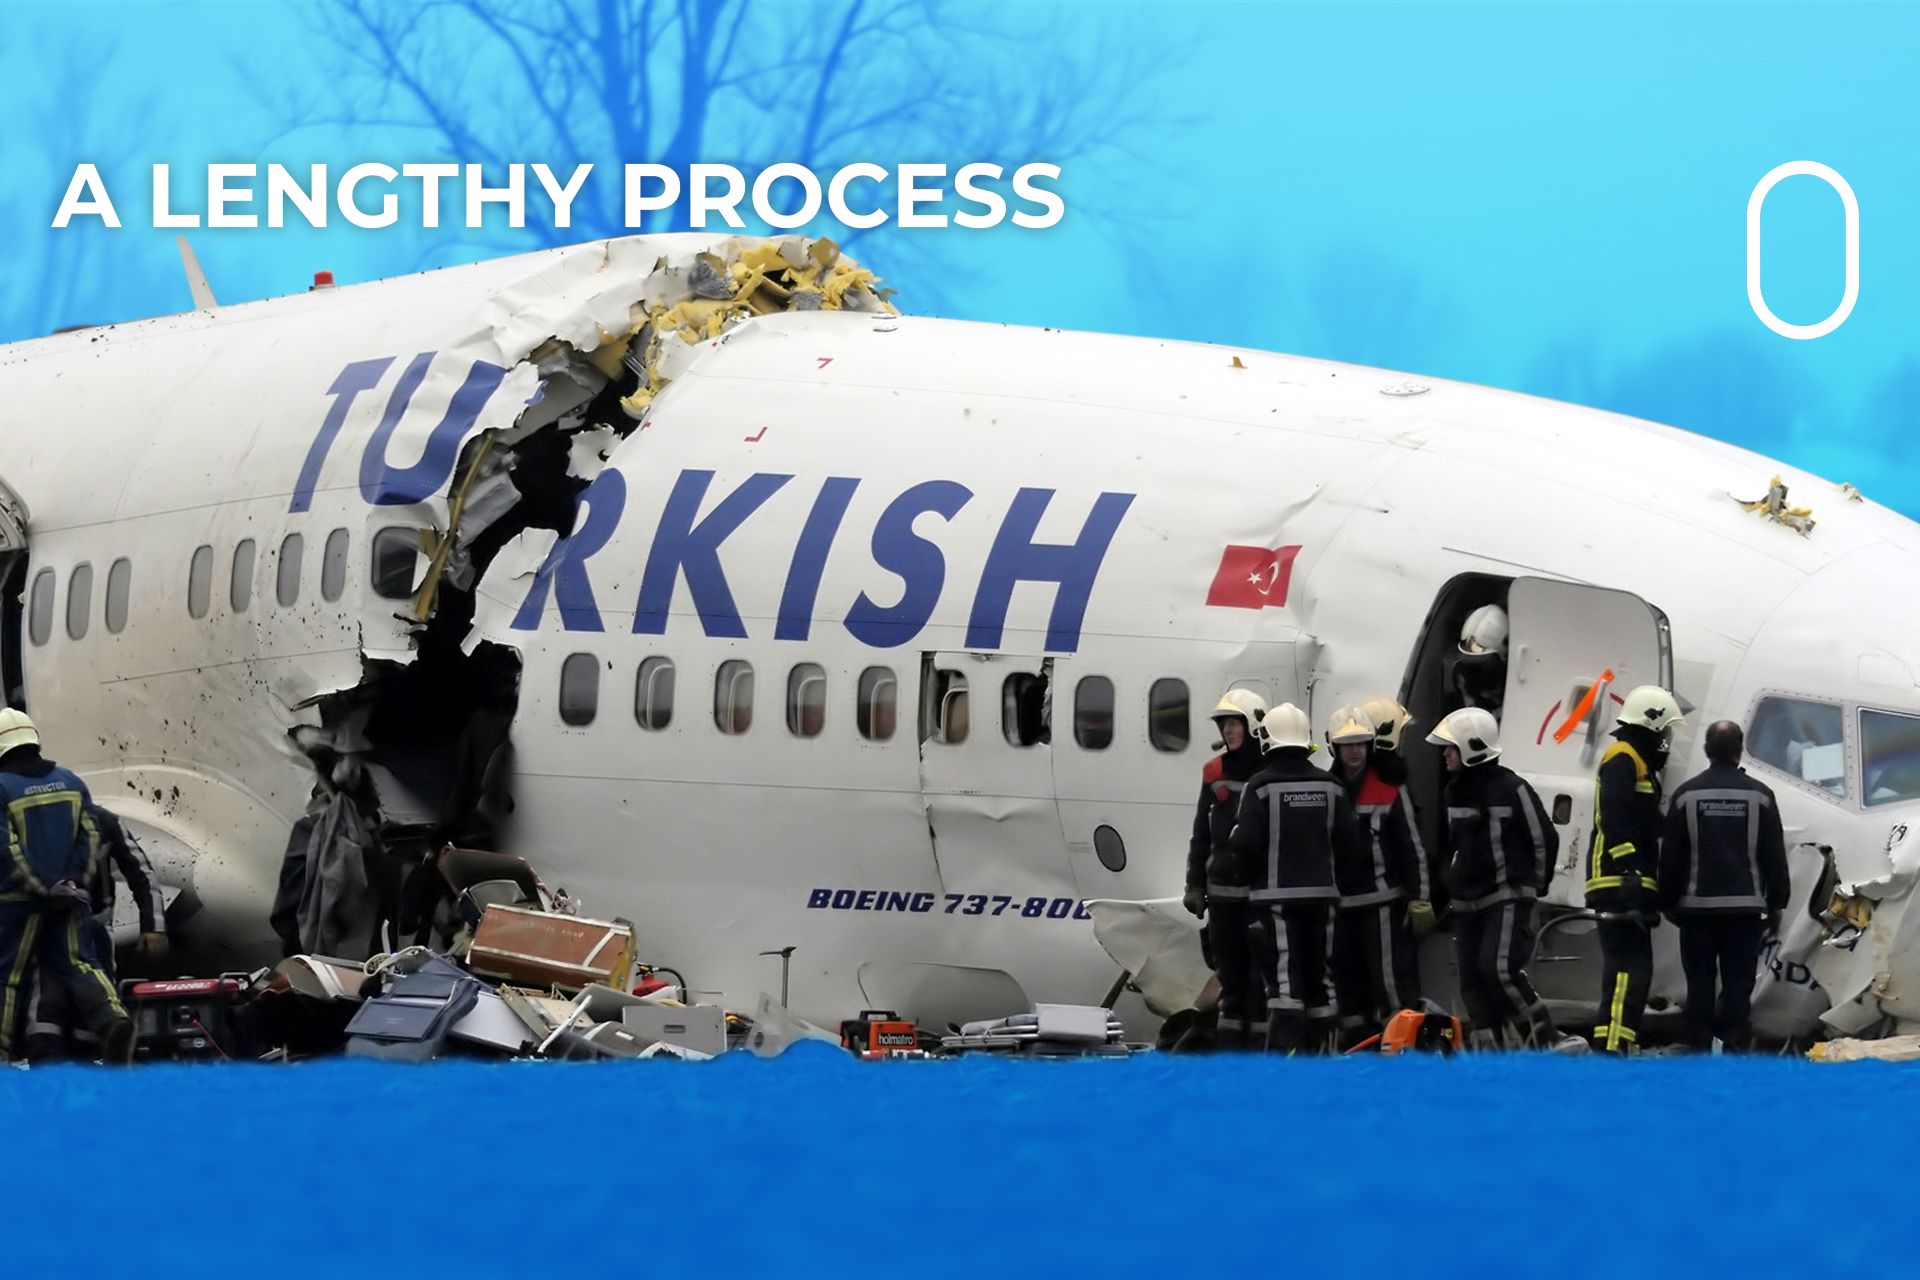 Why Do Air Crash Investigations Take So Lengthy?